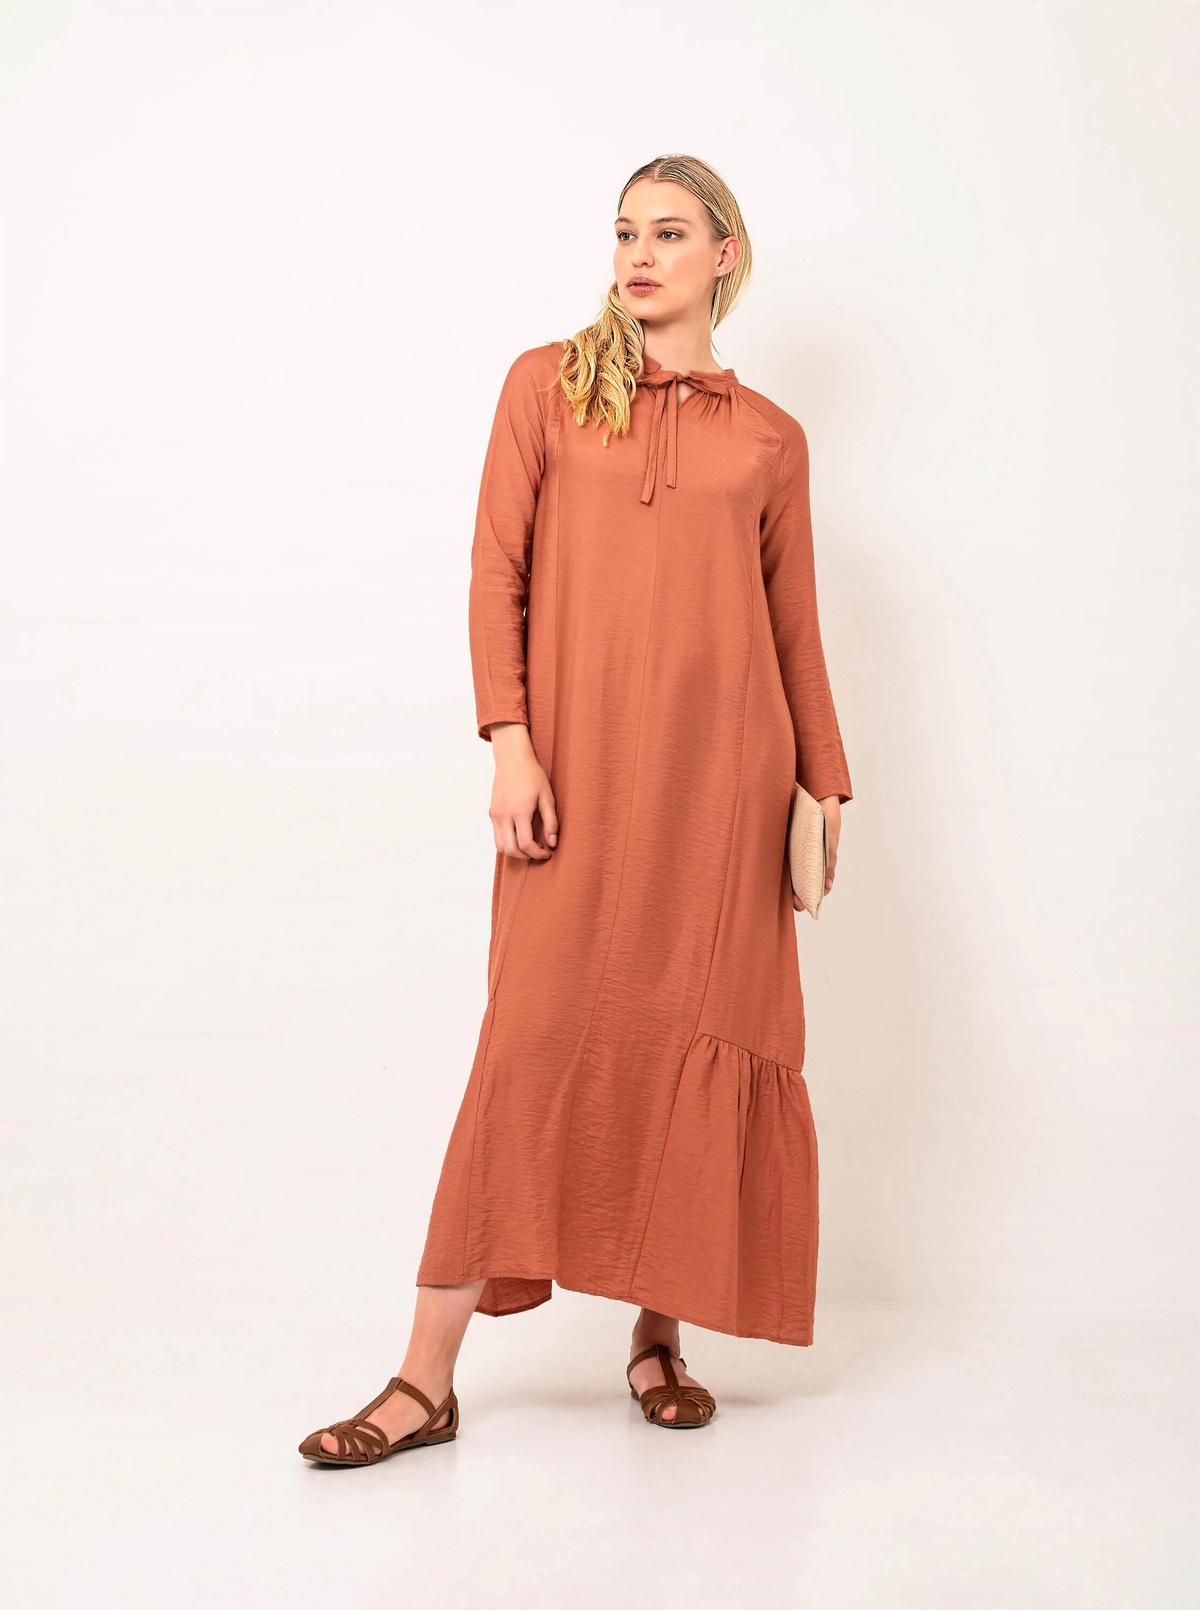 How to wear a long sleeve maxi dress in winter?